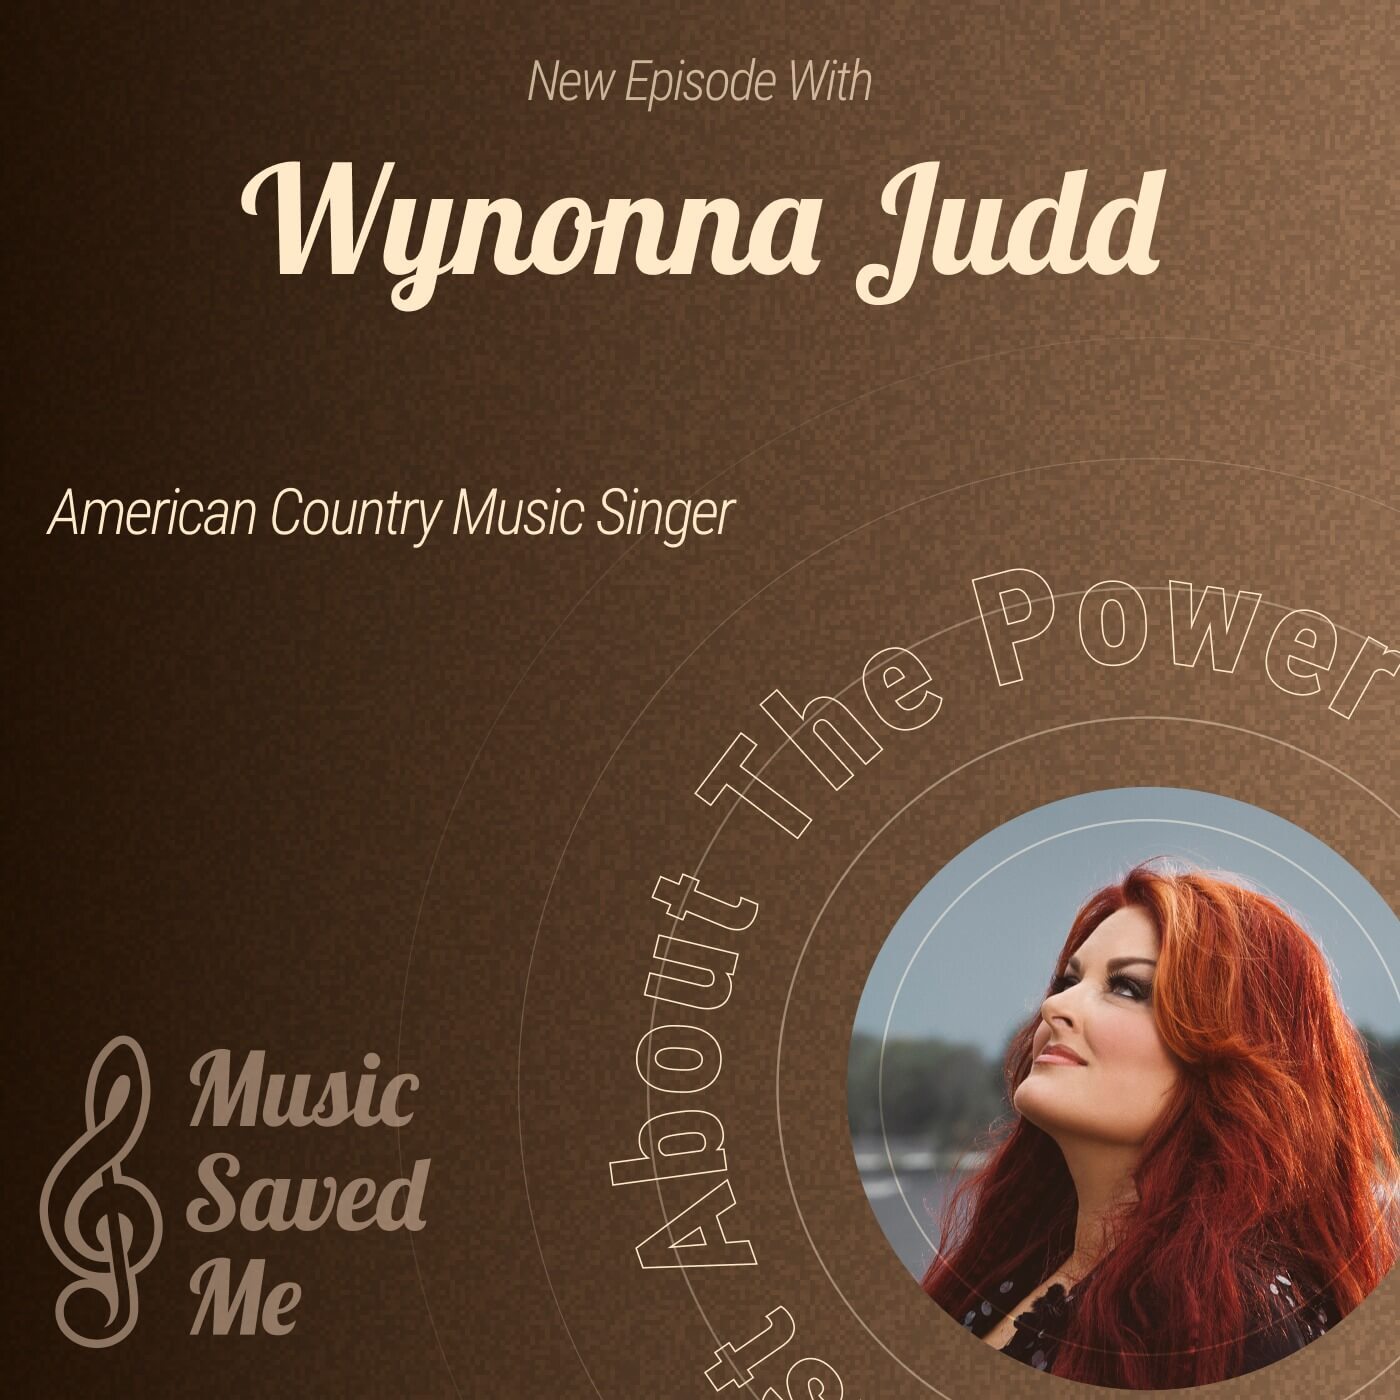 Classic Replay | Music Saved Me with Wynonna